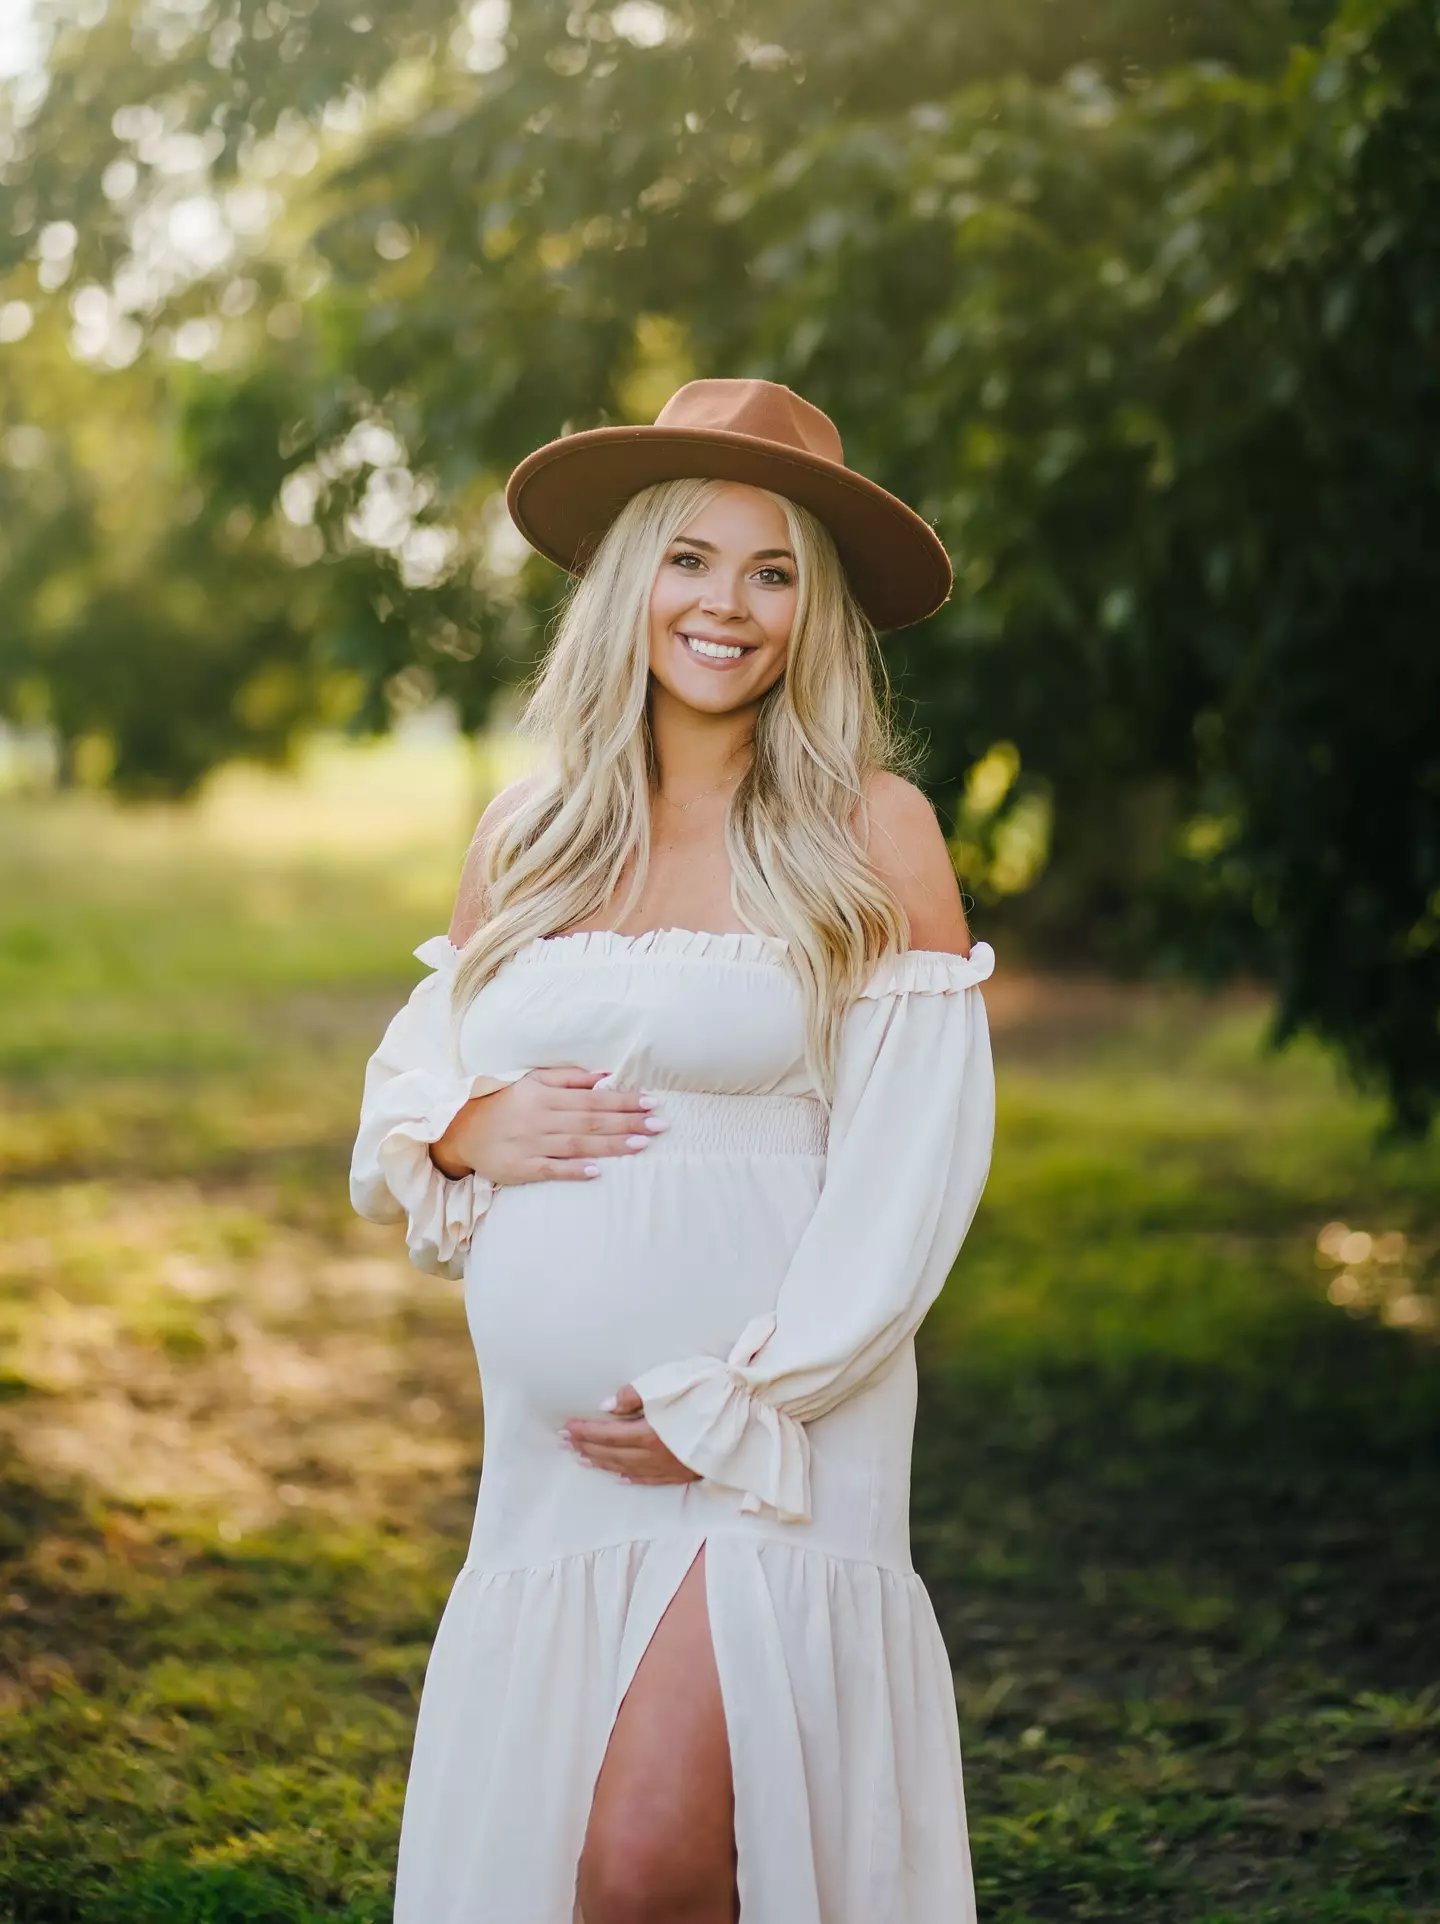 Megan split from the father of her unborn child 19 weeks into her pregnancy.